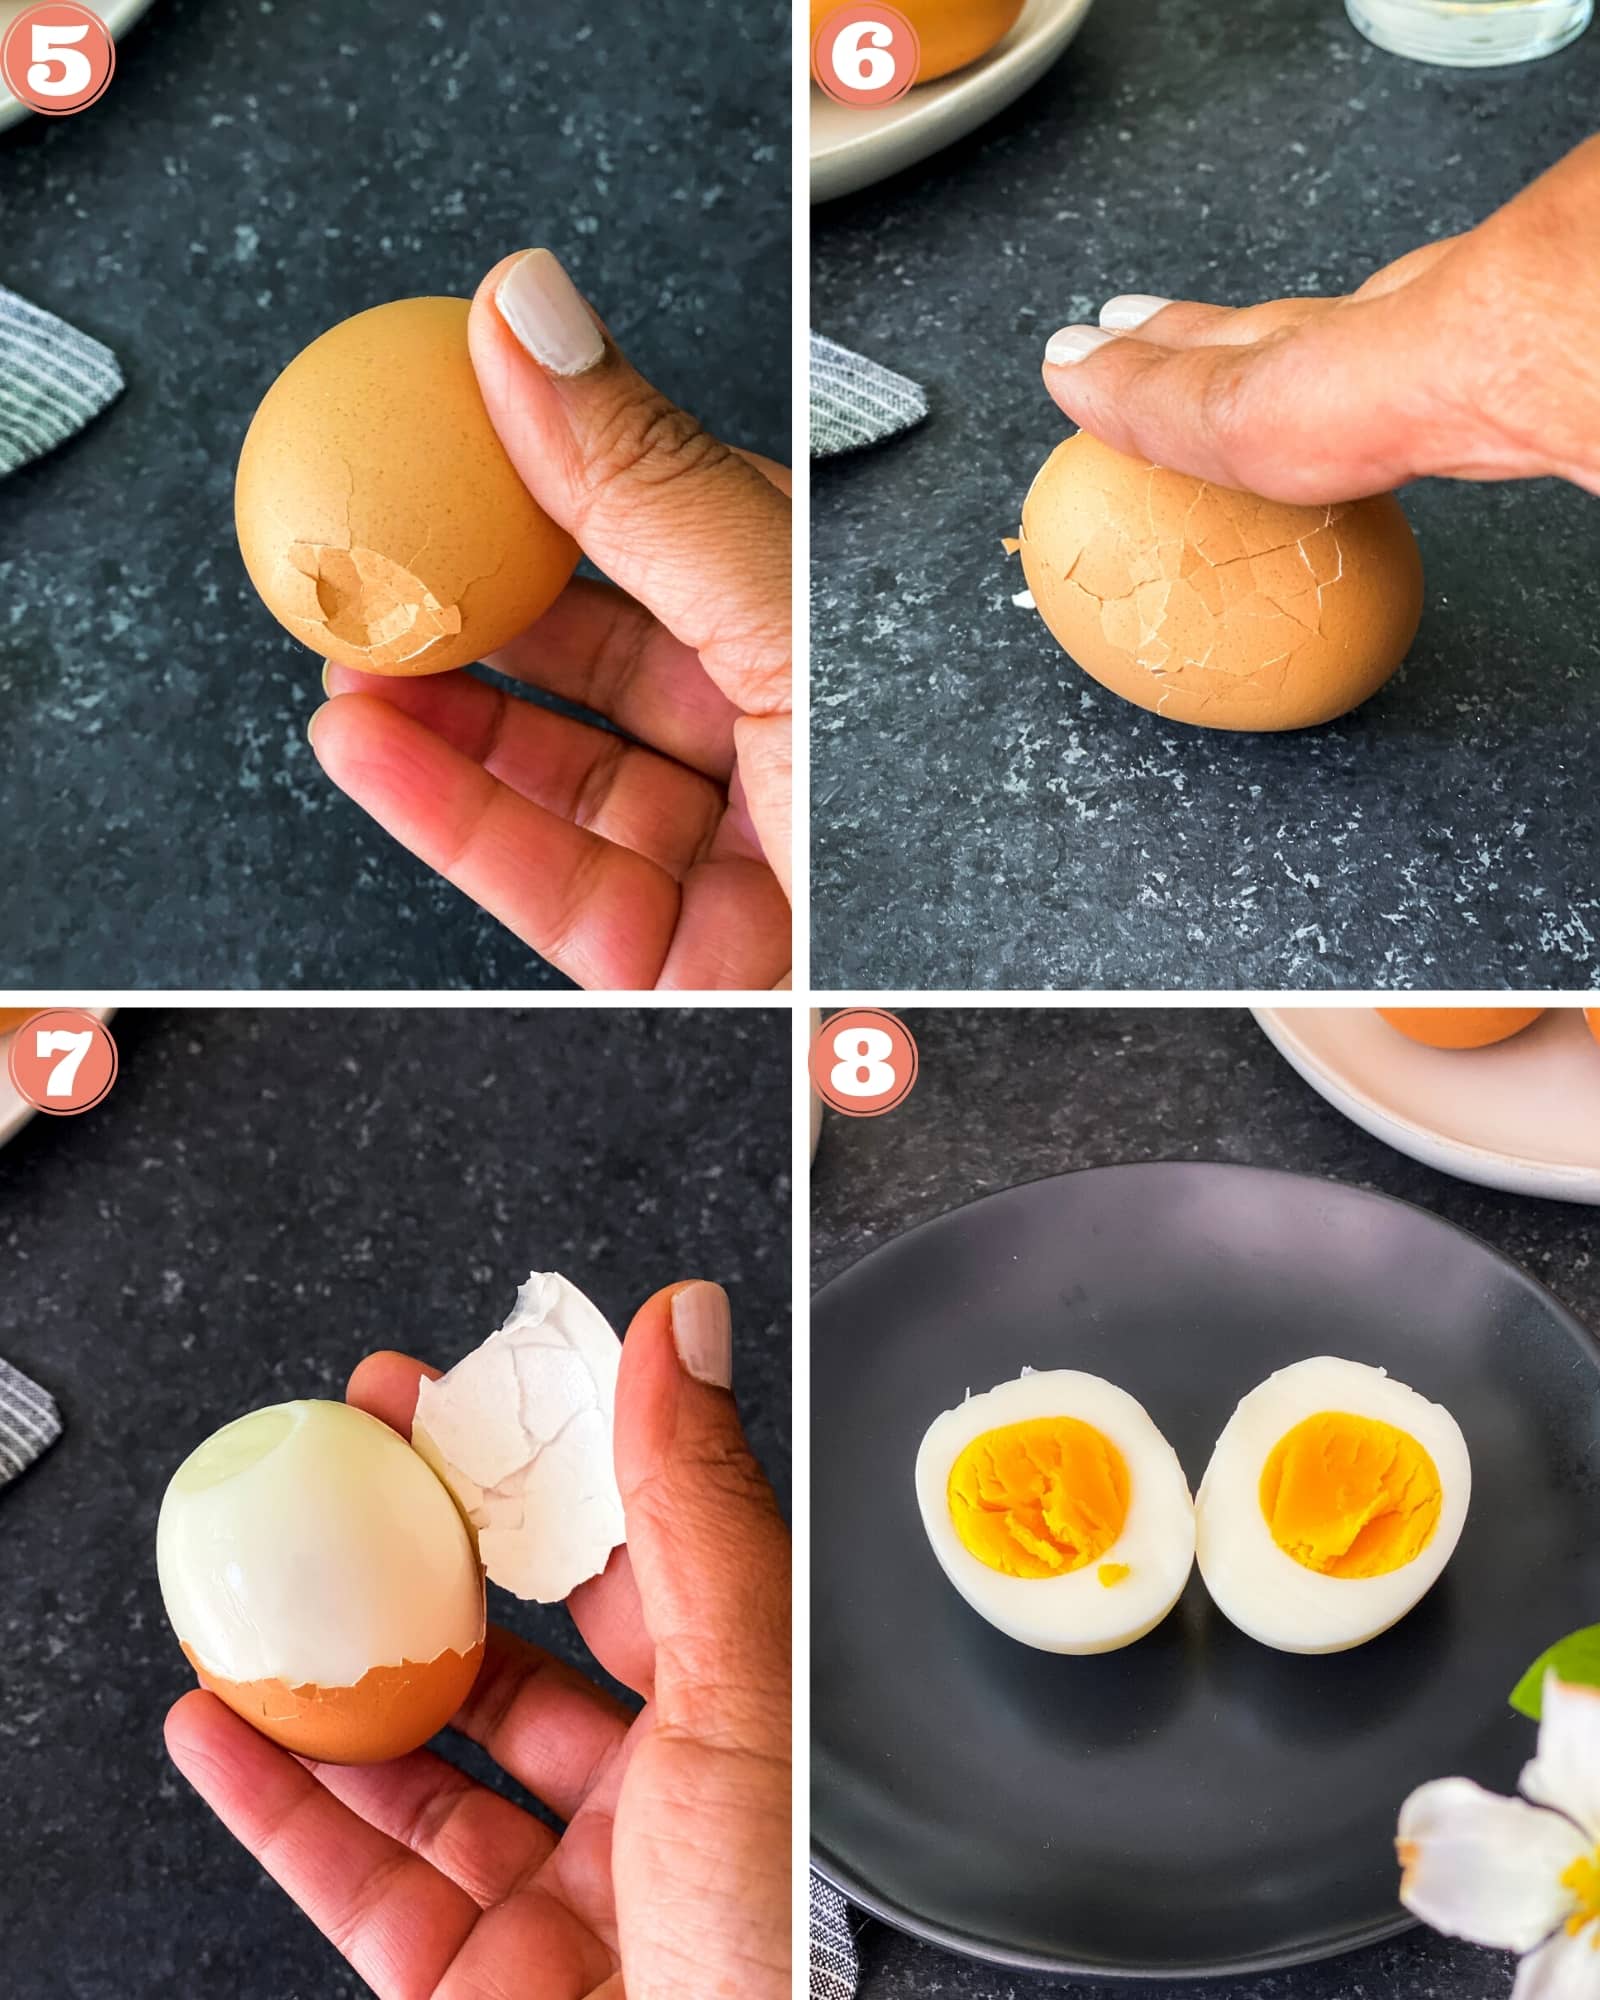 4 images showing how to crack and peel hard boiled egg